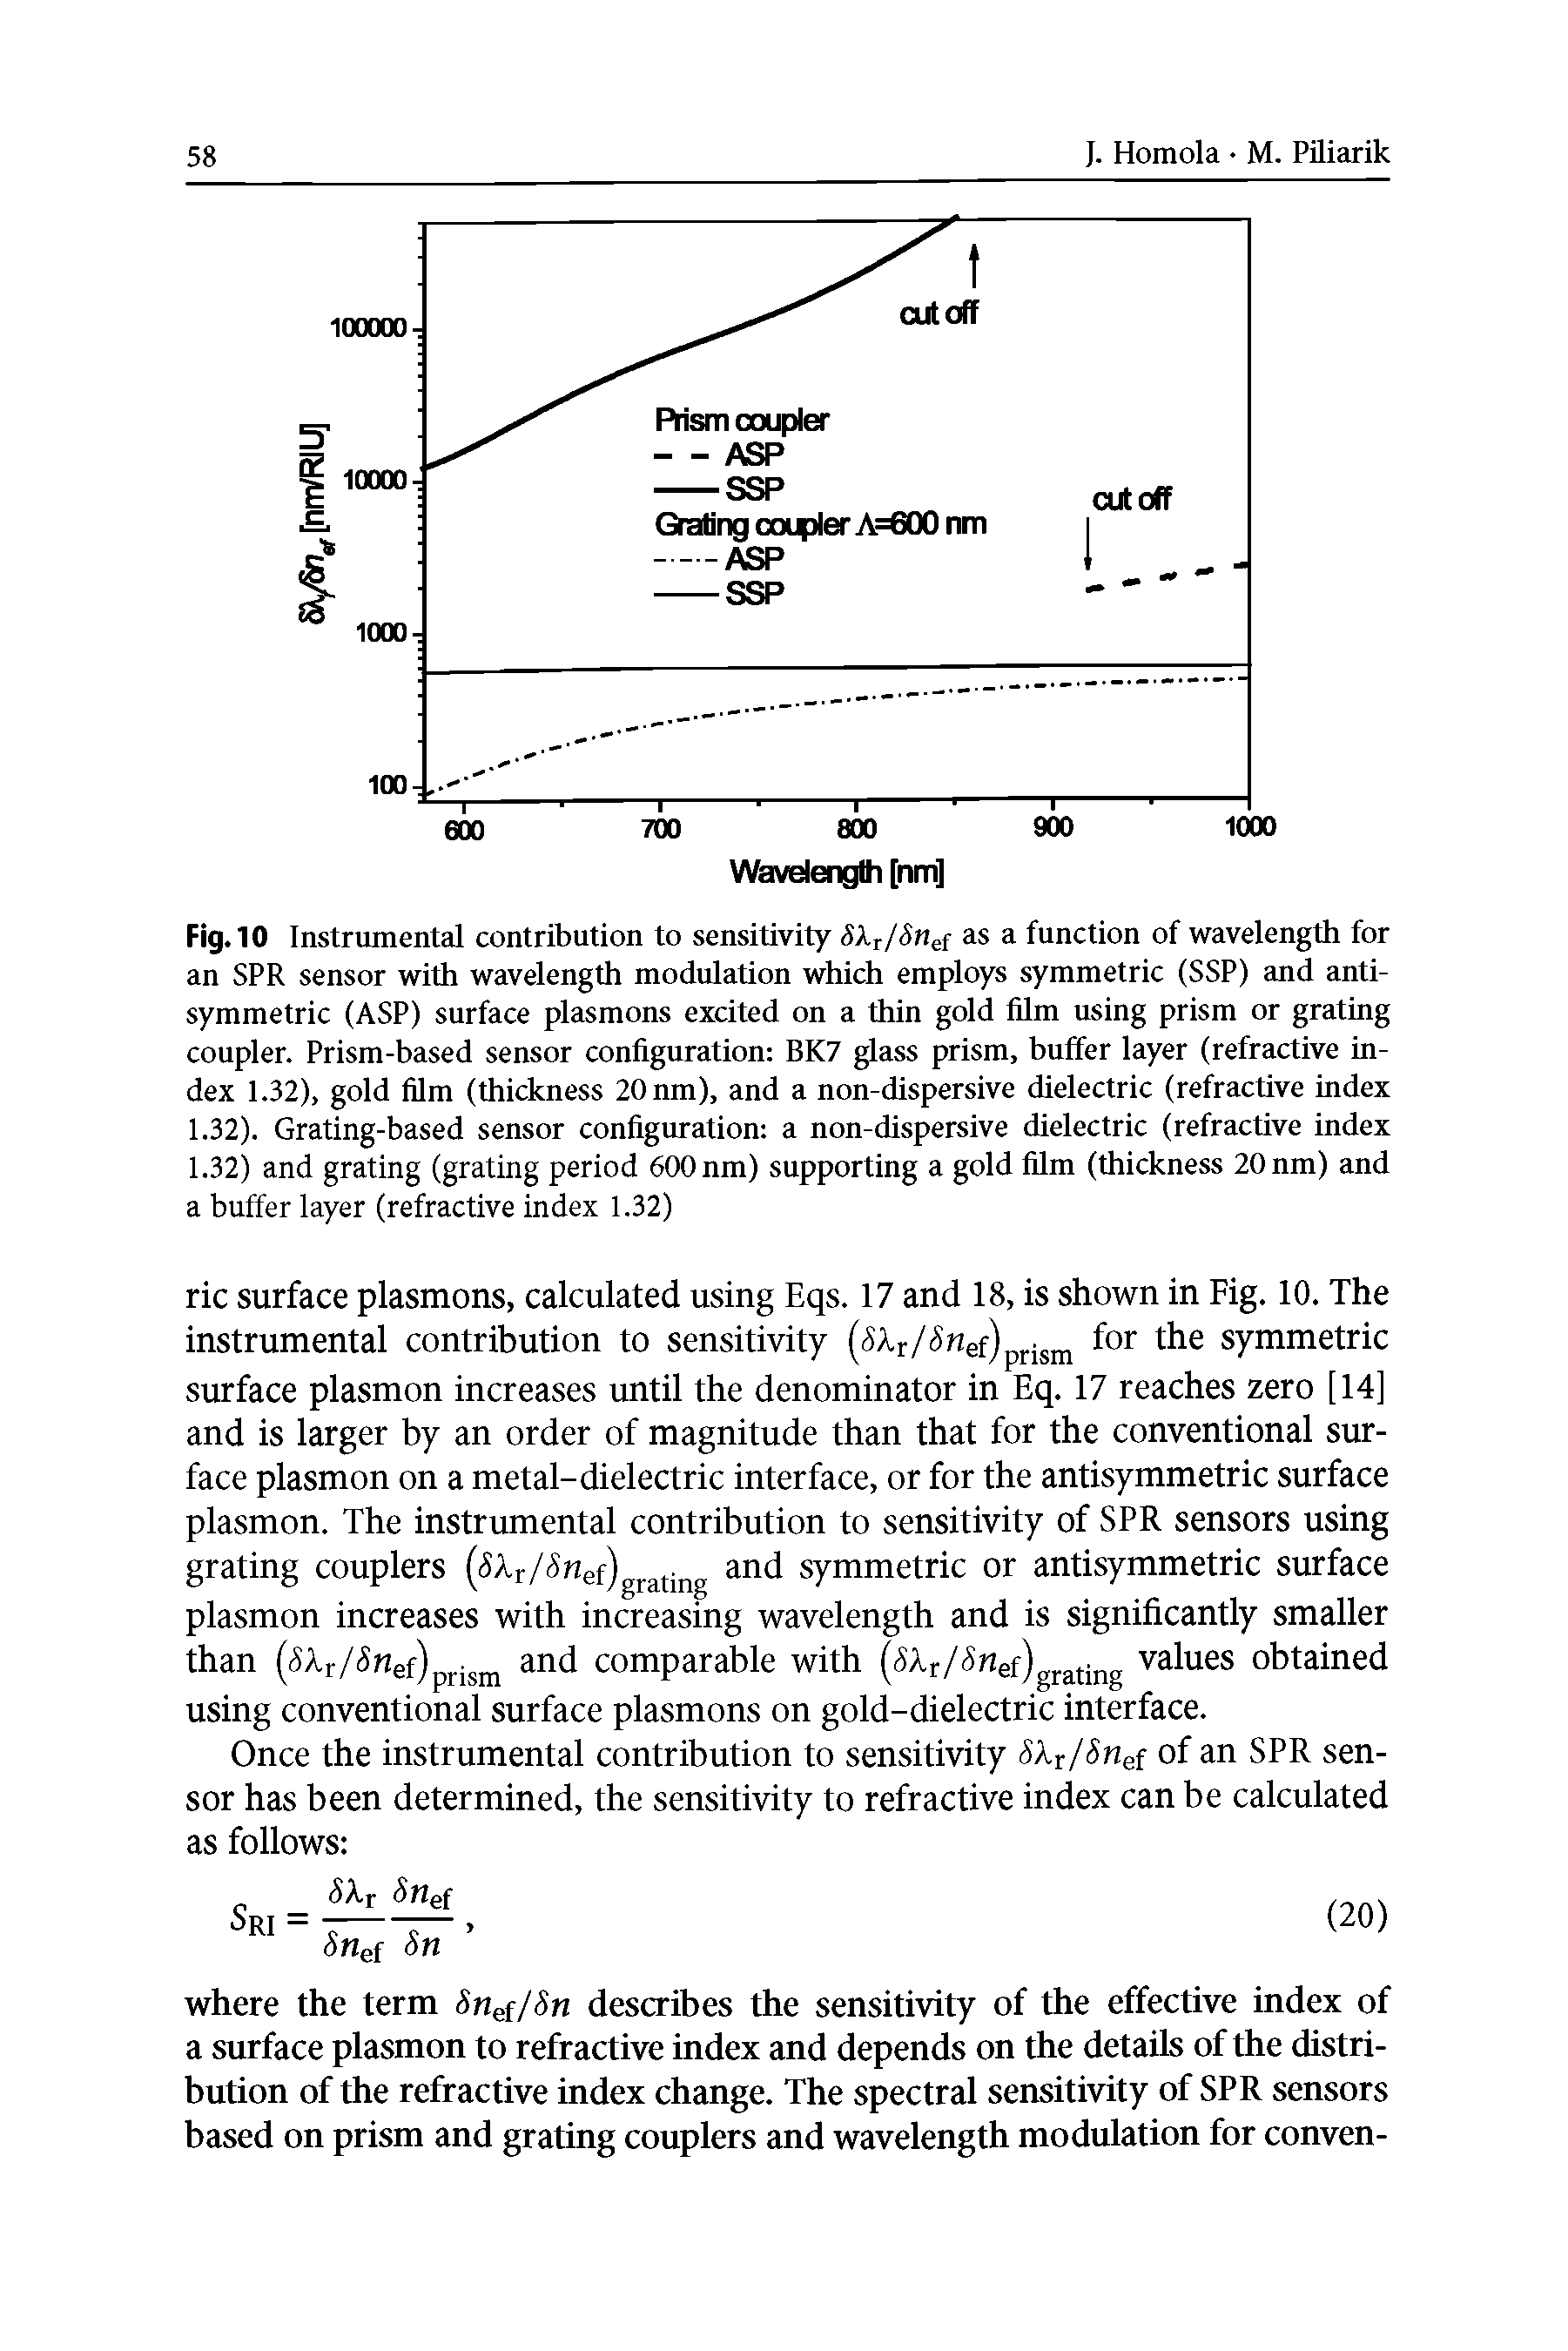 Fig. 10 Instrumental contribution to sensitivity Skr/Sn f as a function of wavelength for an SPR sensor with wavelength modulation which employs symmetric (SSP) and antisymmetric (ASP) surface plasmons excited on a thin gold film using prism or grating coupler. Prism-based sensor configuration BK7 glass prism, buffer layer (refractive index 1.32), gold film (thickness 20 nm), and a non-dispersive dielectric (refractive index...